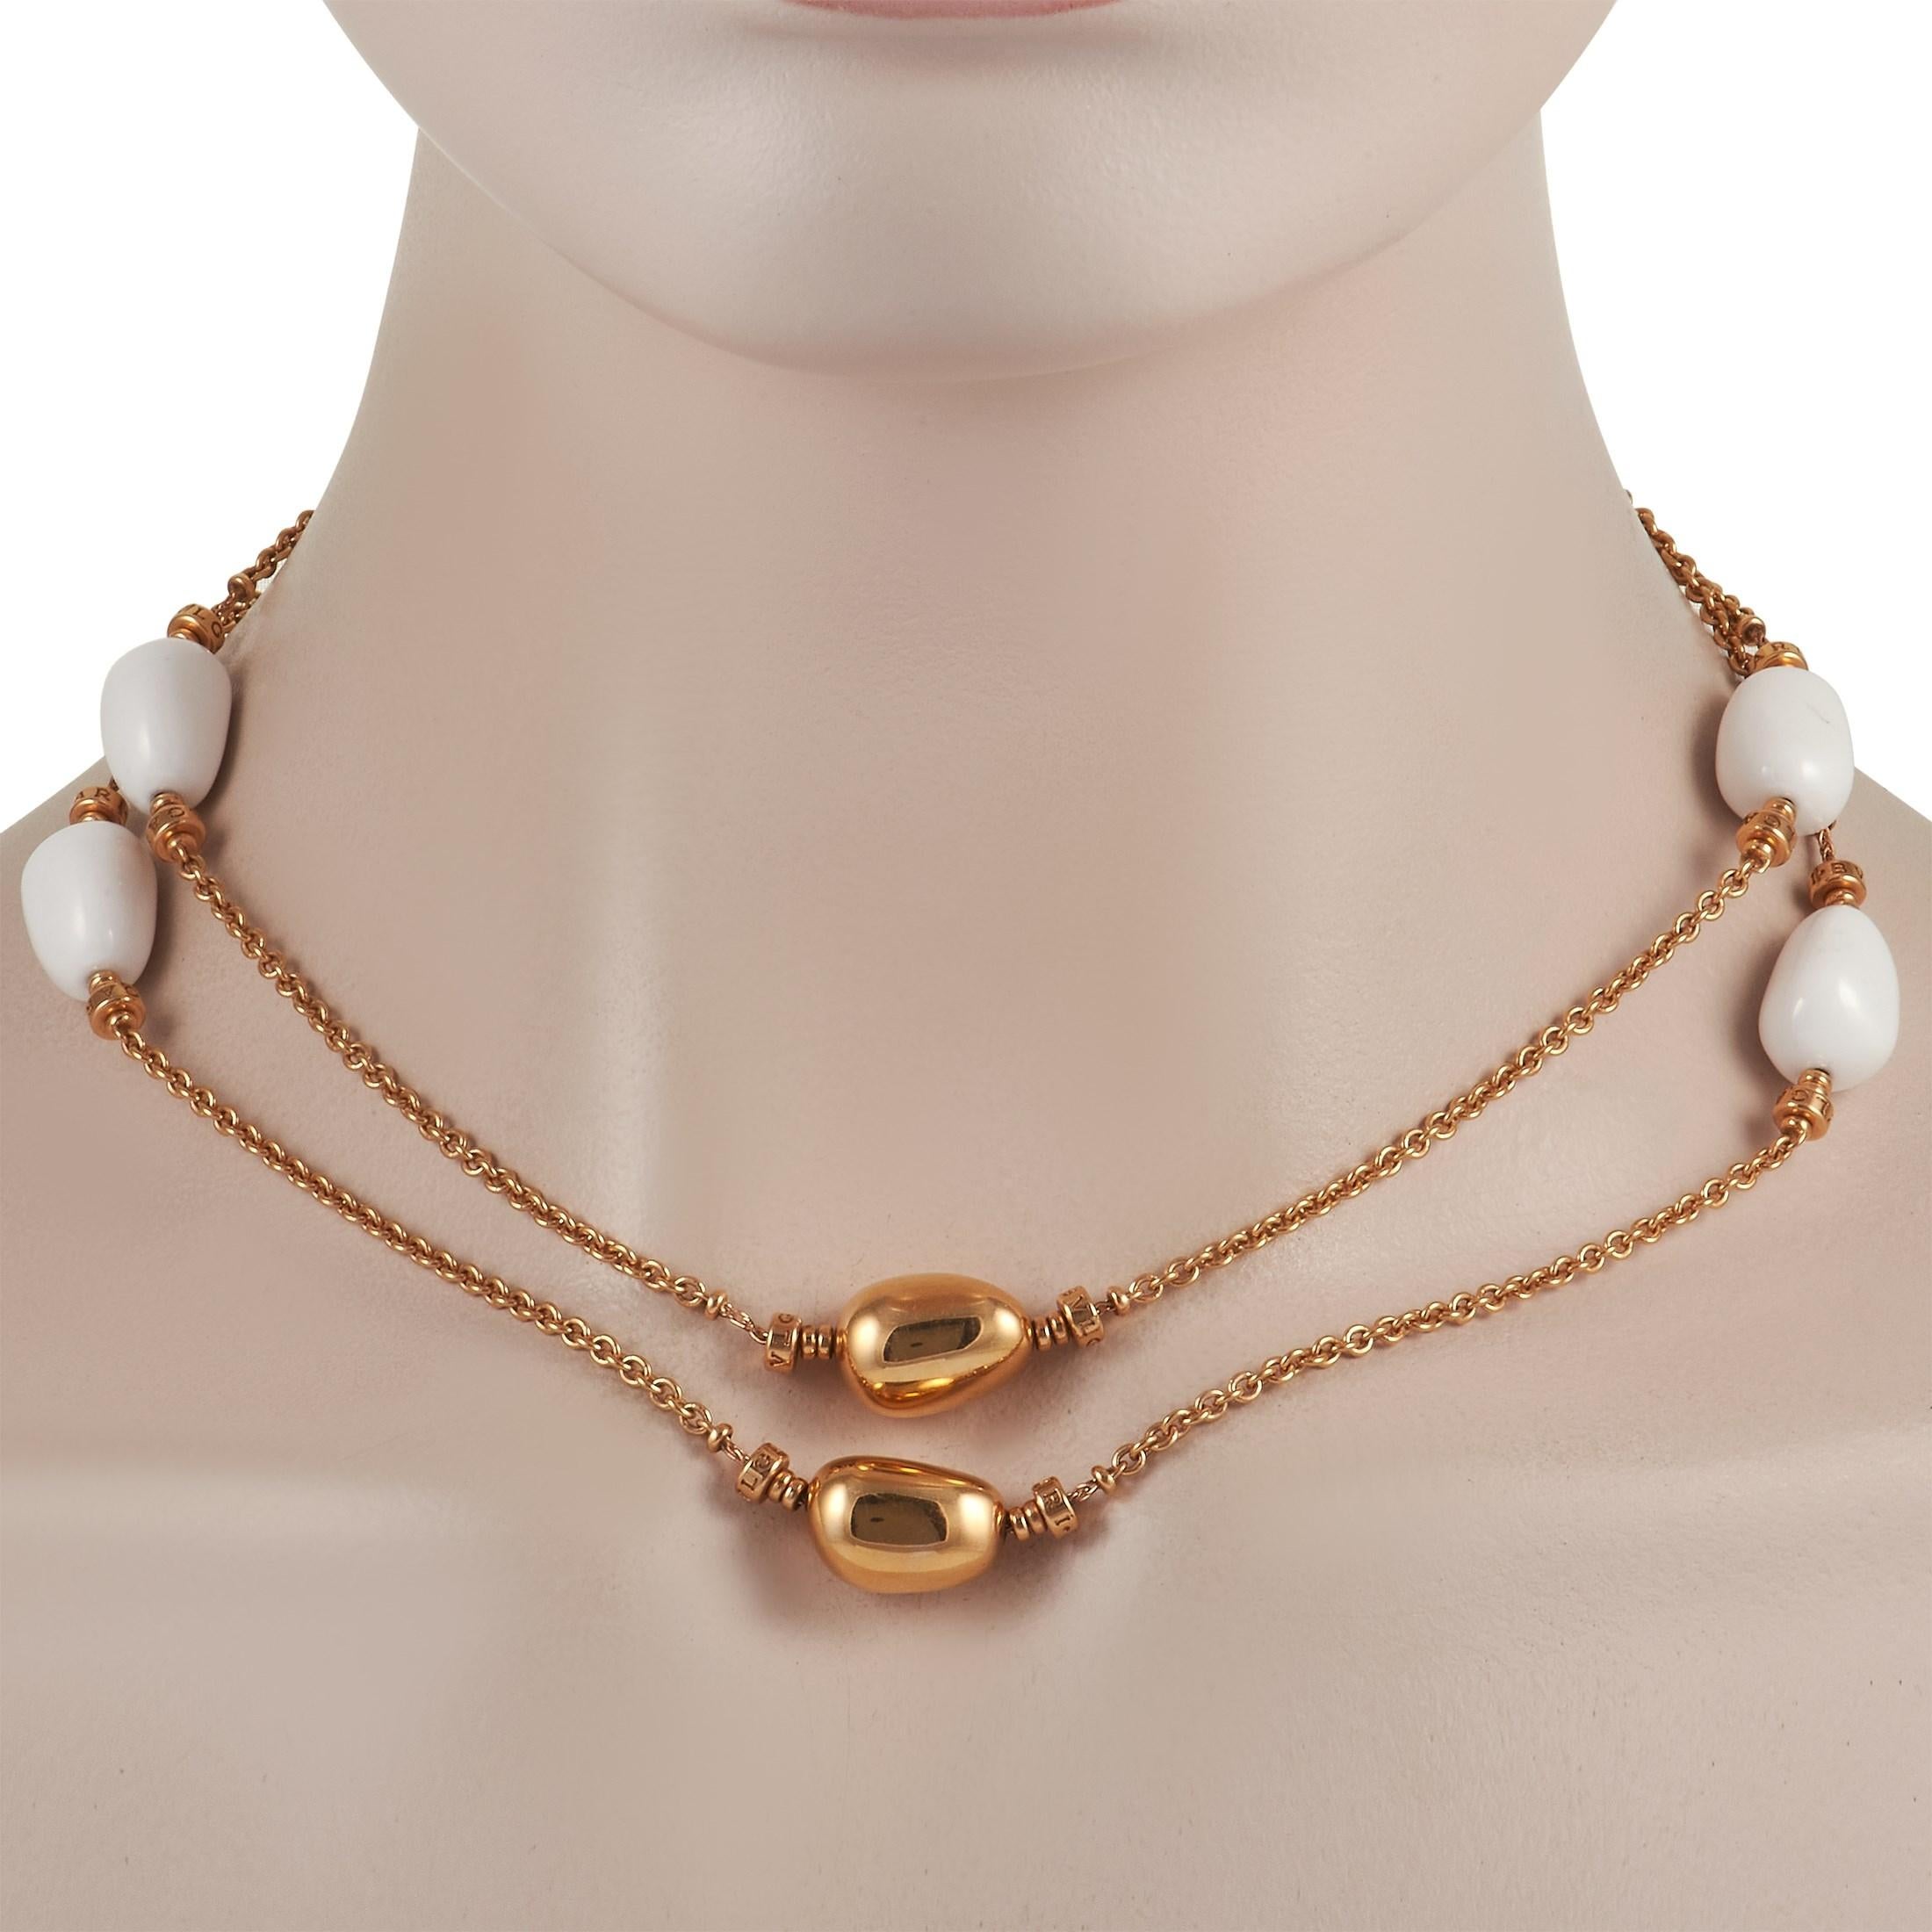 Measuring 34” long, this dramatic Bvlgari Mediterranean Eden necklace is poised to put the perfect finishing touch on any outfit. Along this sophisticated piece, you’ll find smooth White Agate accents contrasting beautifully against the opulent 18K